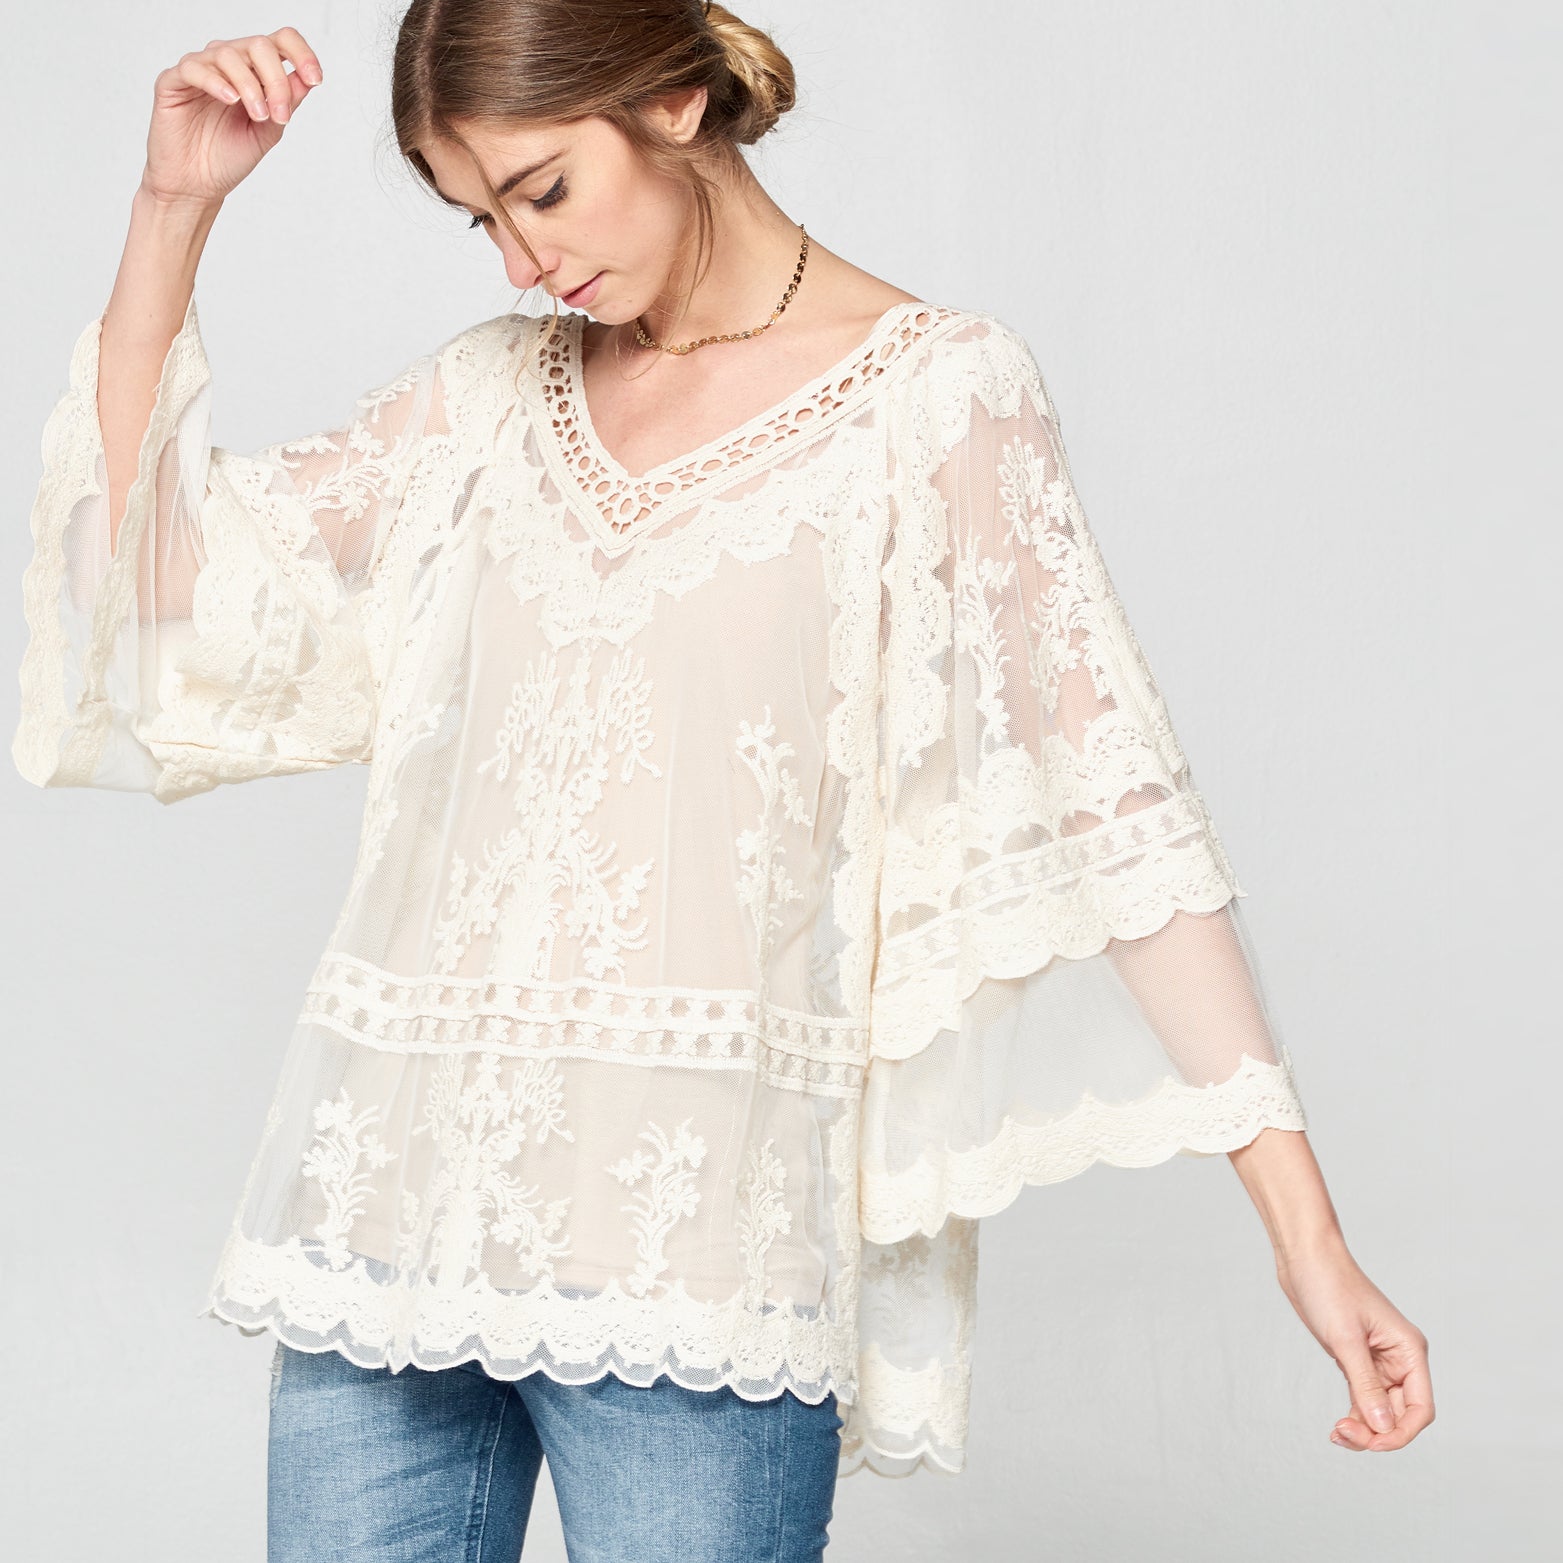 Embroidered Fleur Lace Top - Love, Kuza